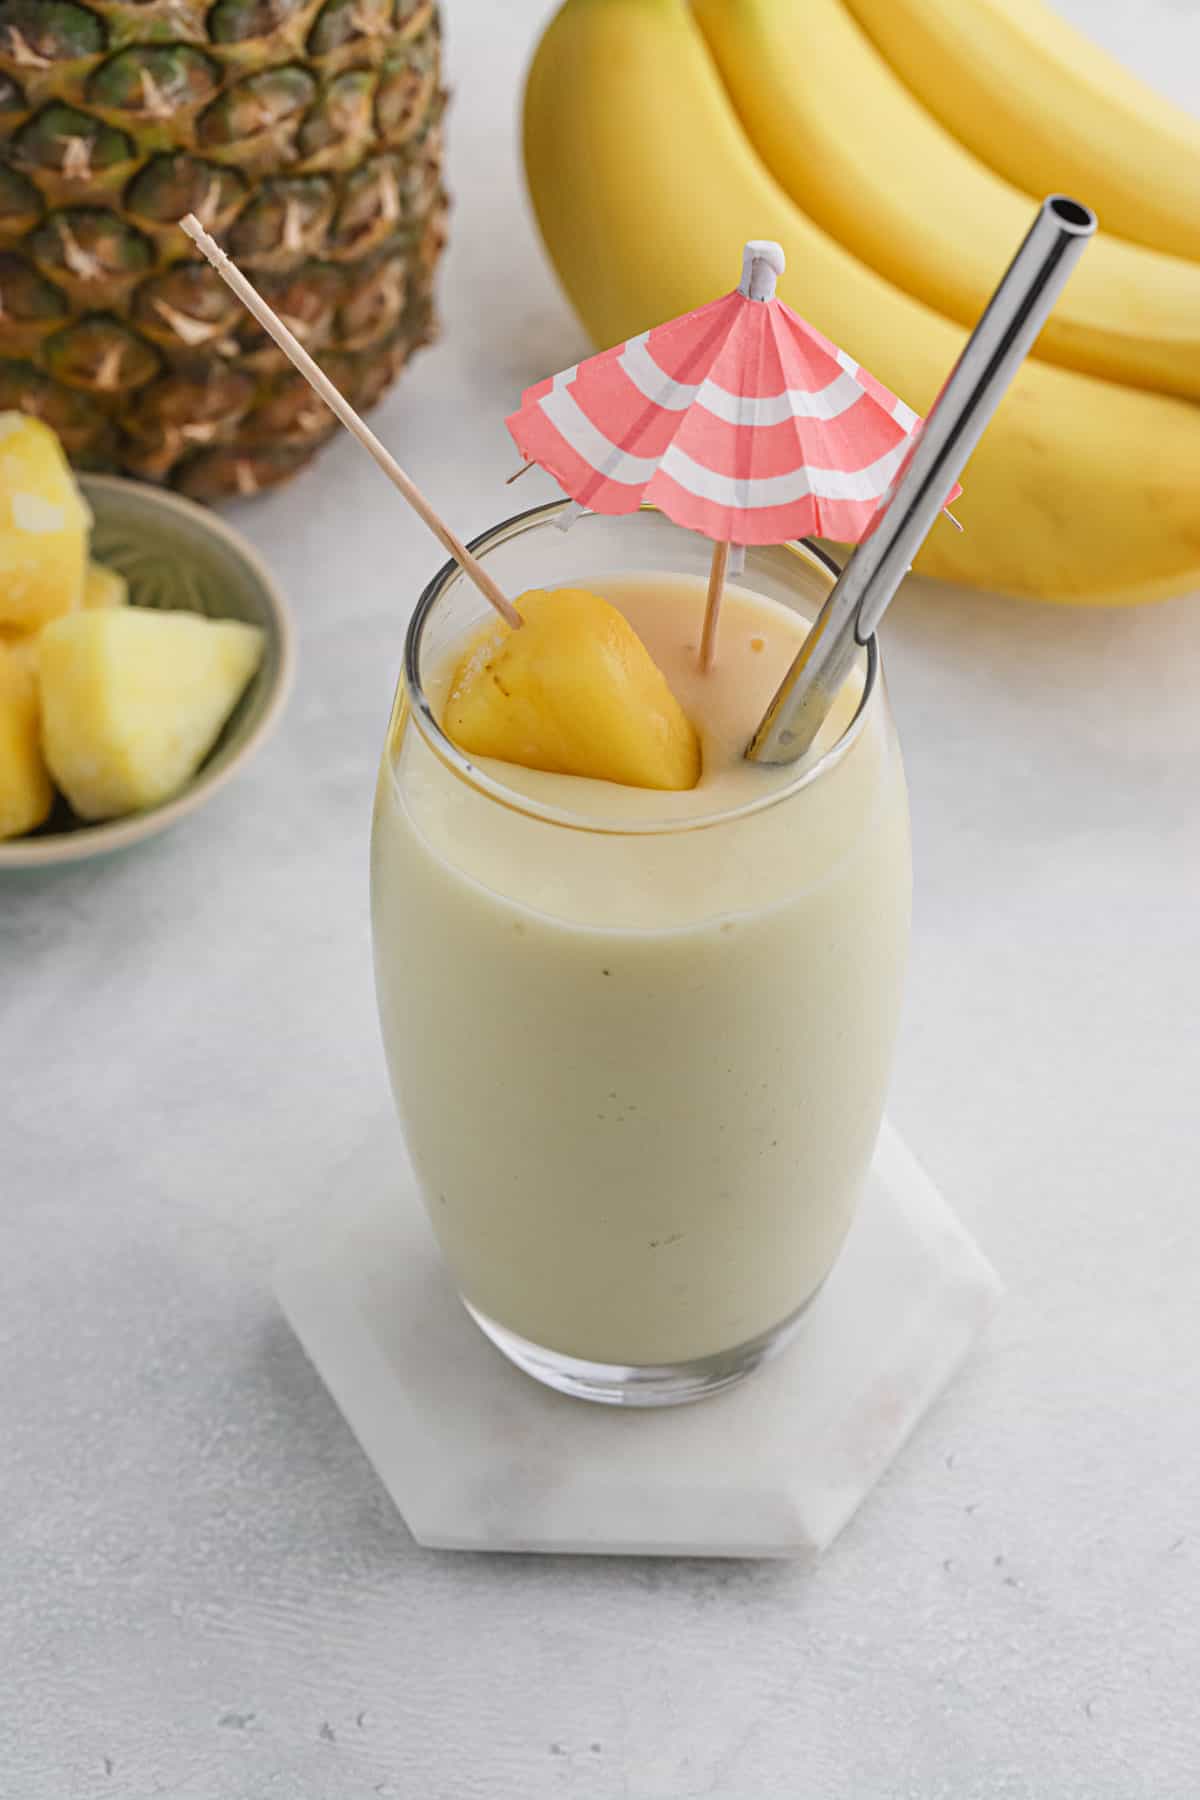 A pina colada smoothie on the table with a lemon wedge and drink umbrella for garnish.